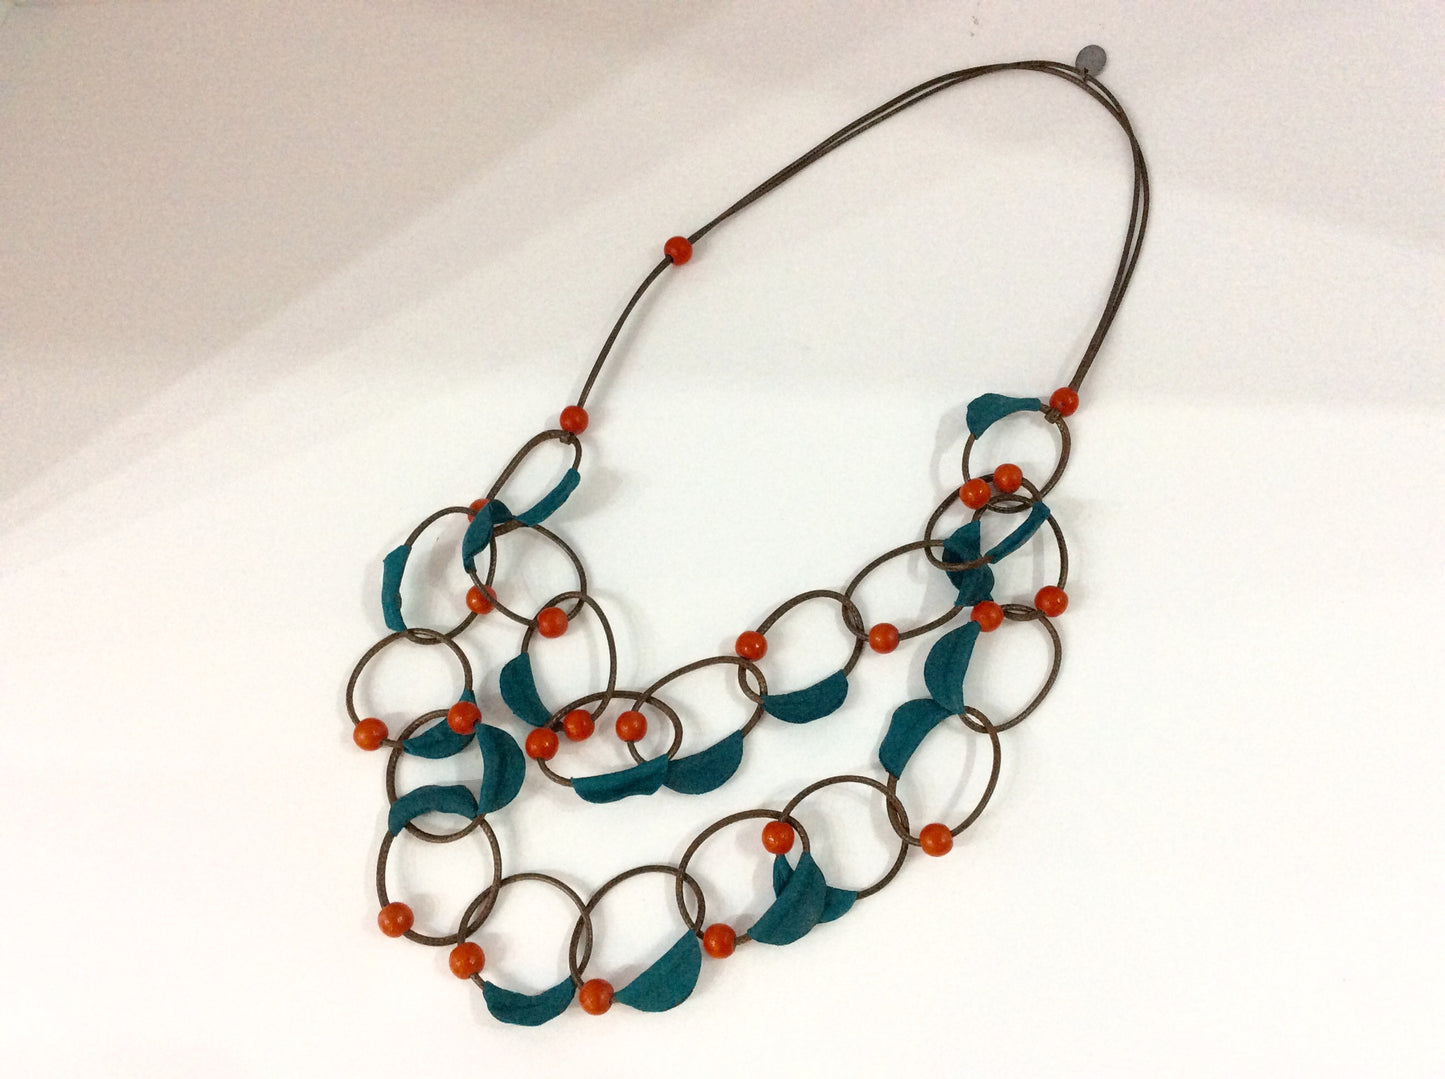 Necklace-Brown Italian Leather Double Cord with blue leather and red wooden beading